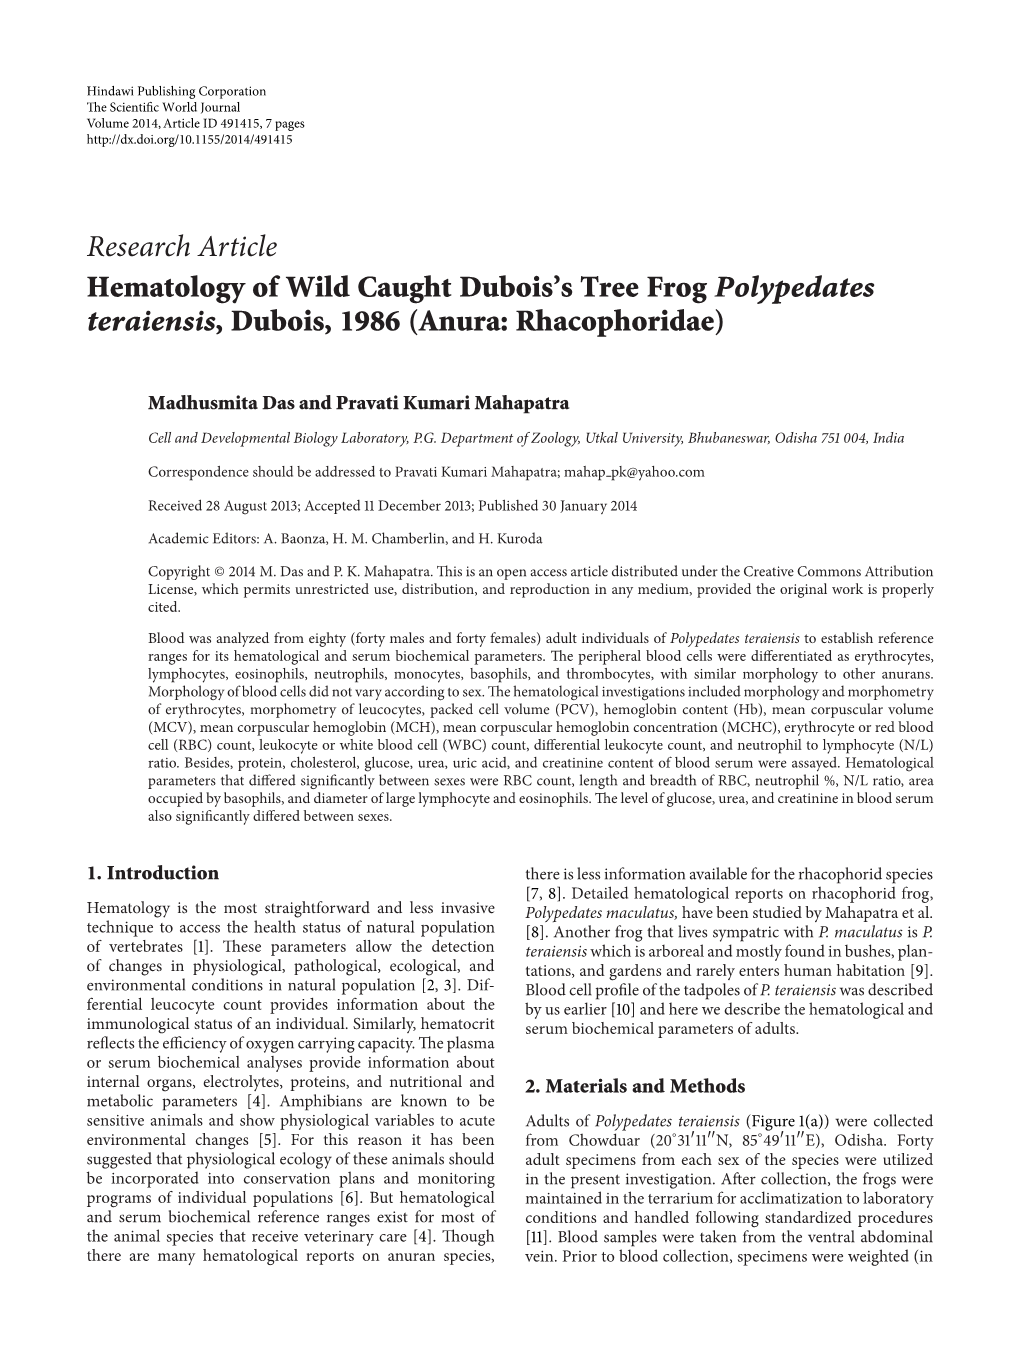 Hematology of Wild Caught Dubois's Tree Frog Polypedates Teraiensis